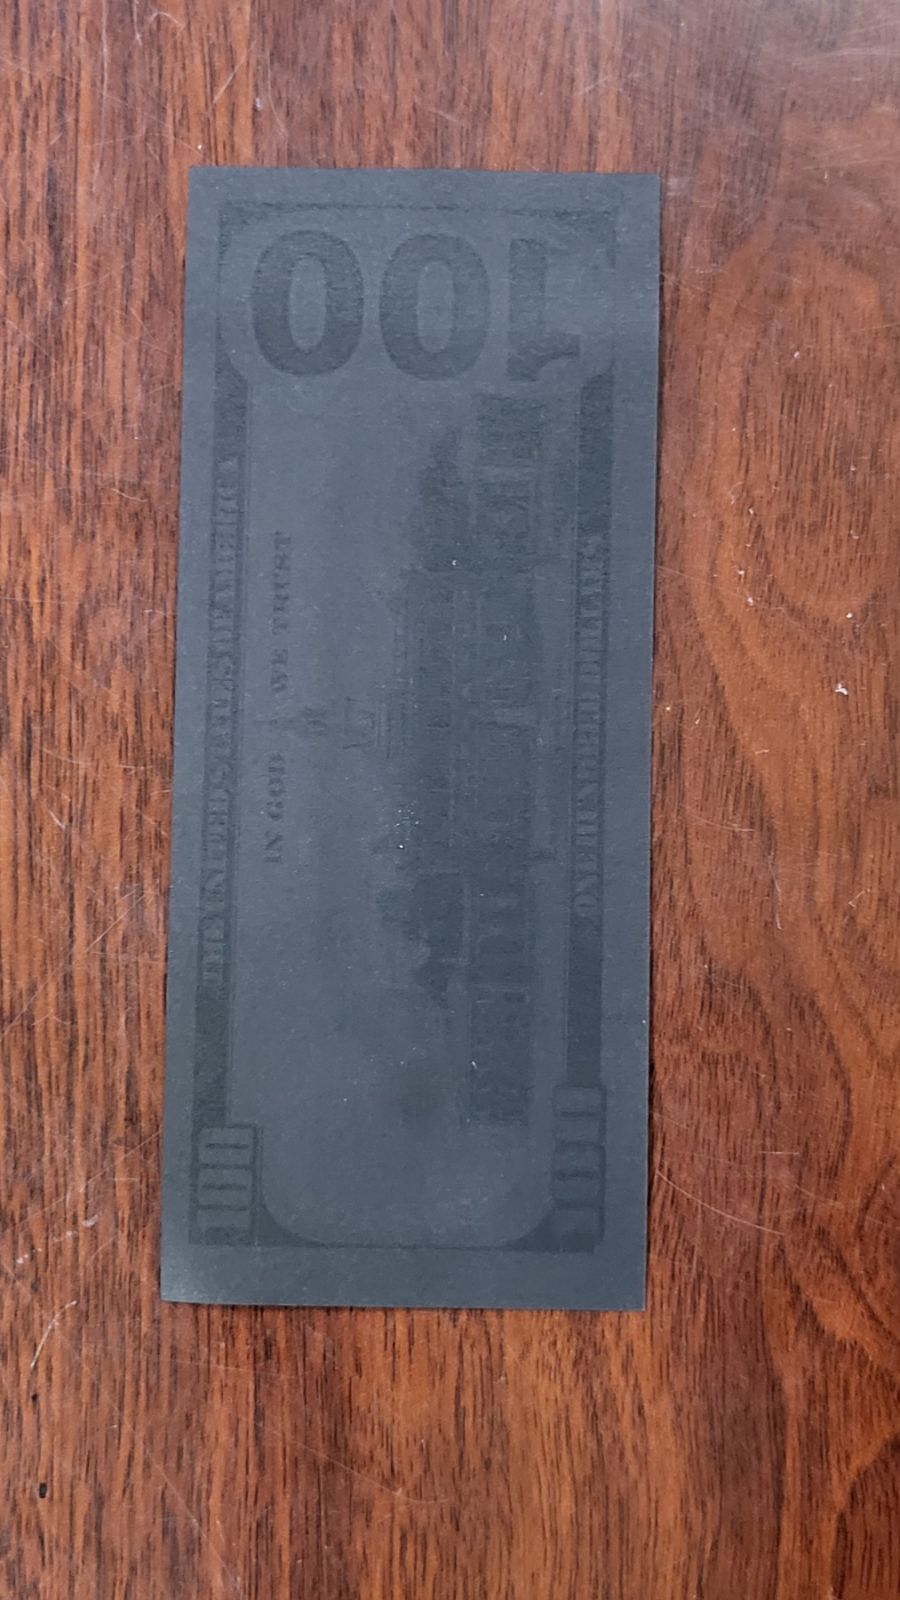 A suspected $100 banknote that had been dyed black in this supplied photo